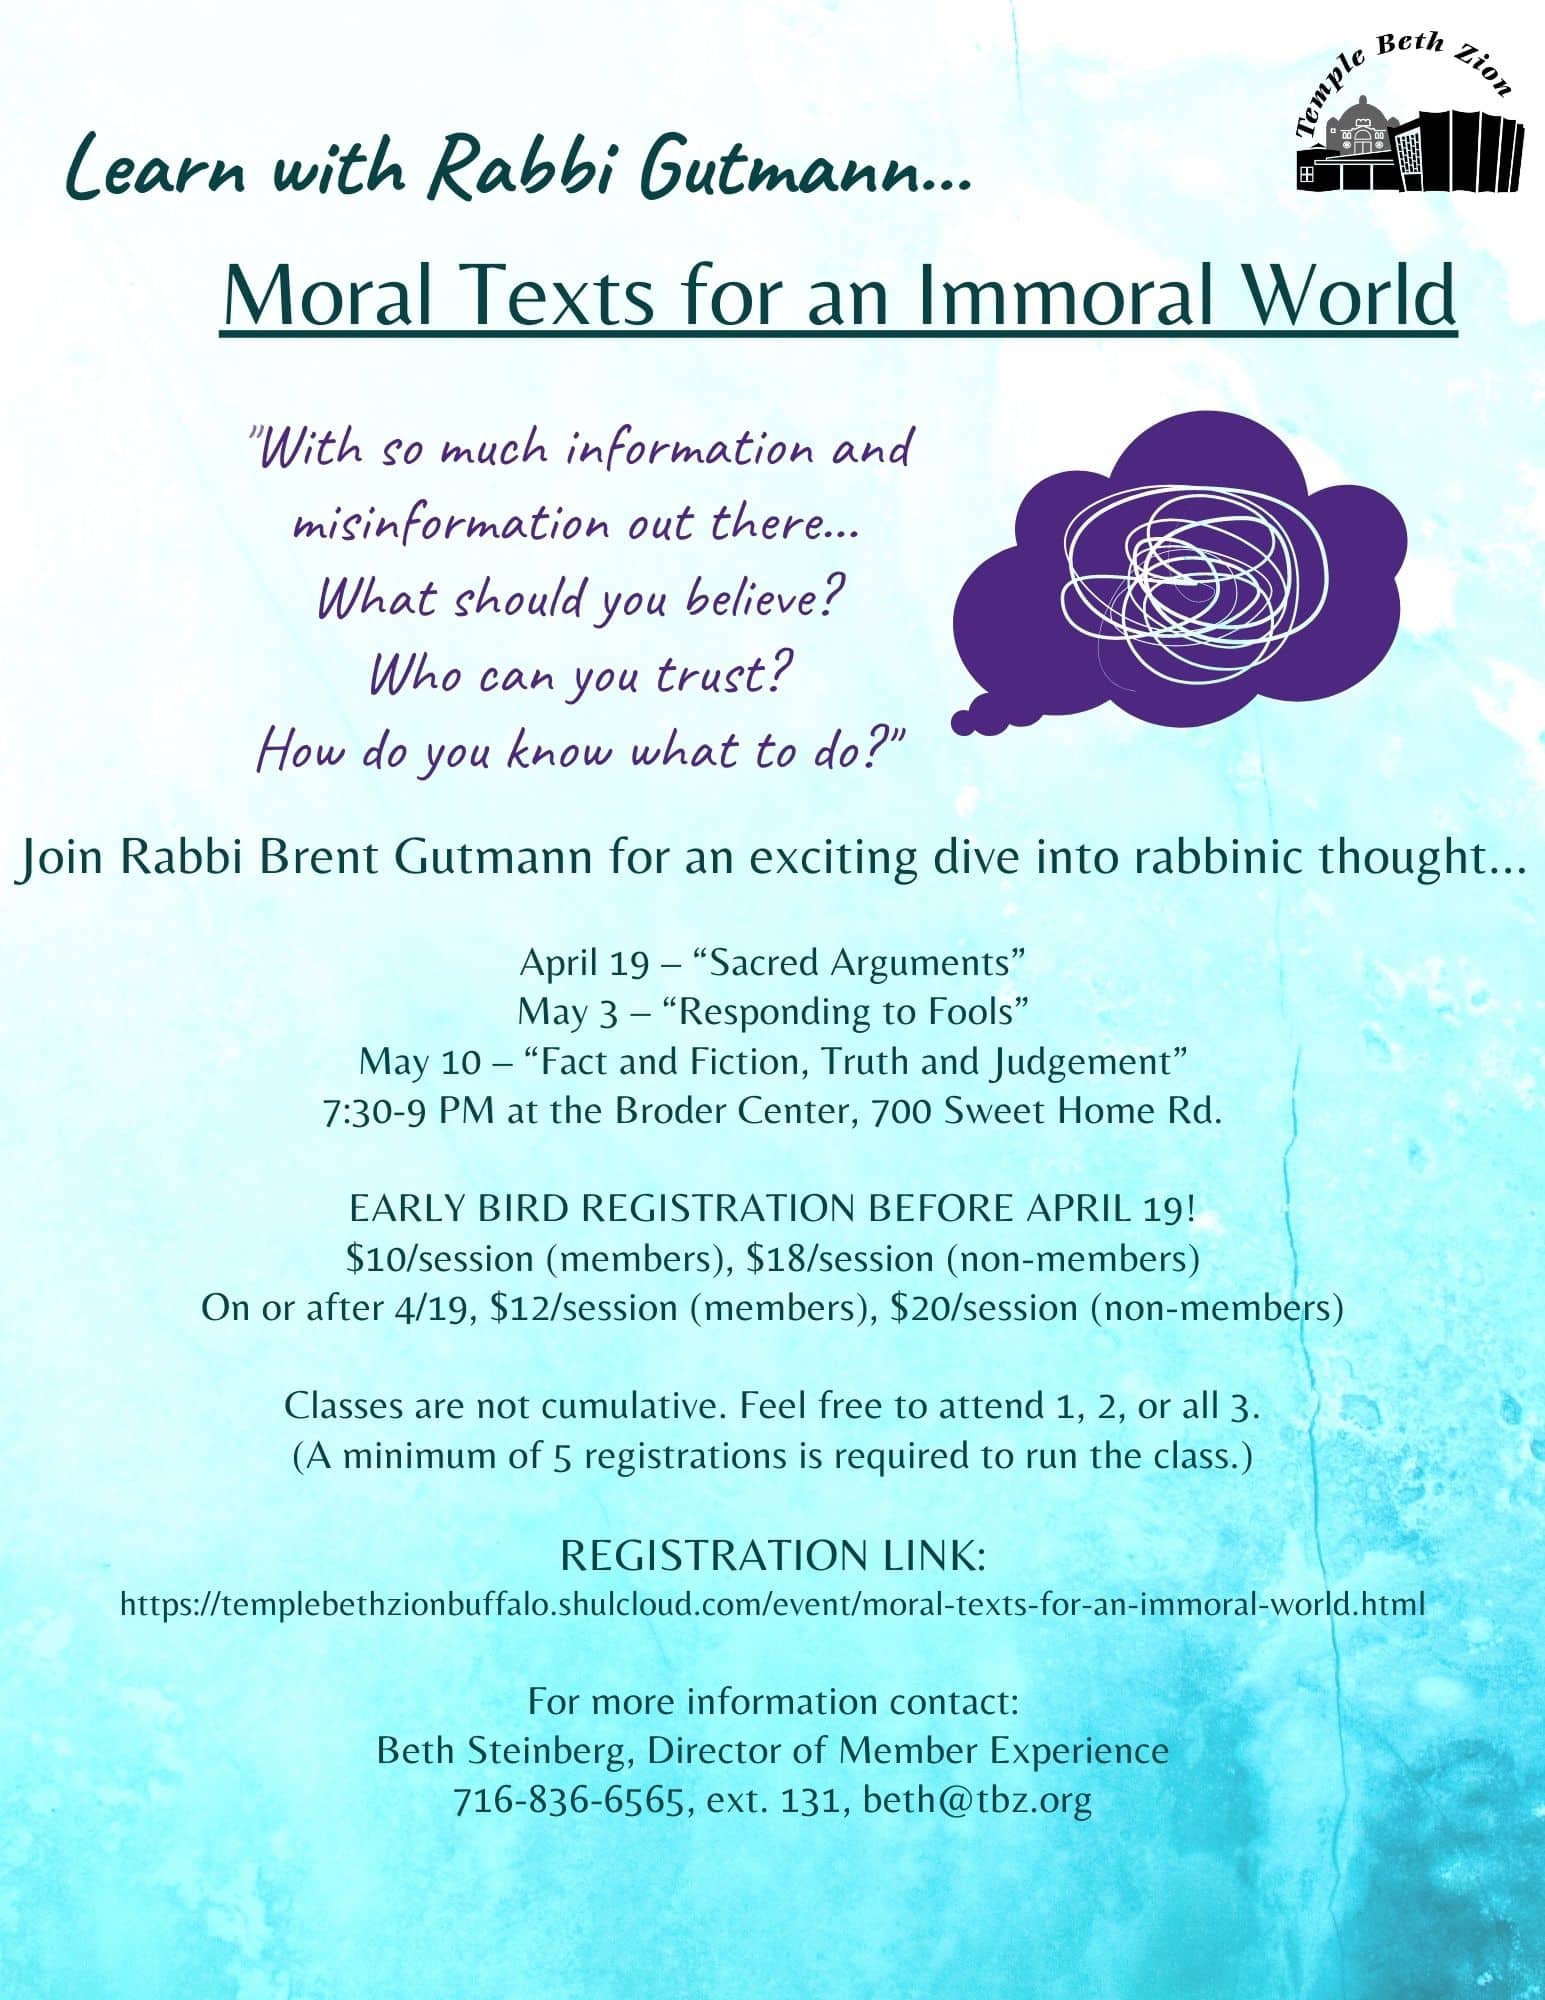 Moral Texts for an Immoral World - Updated Moral